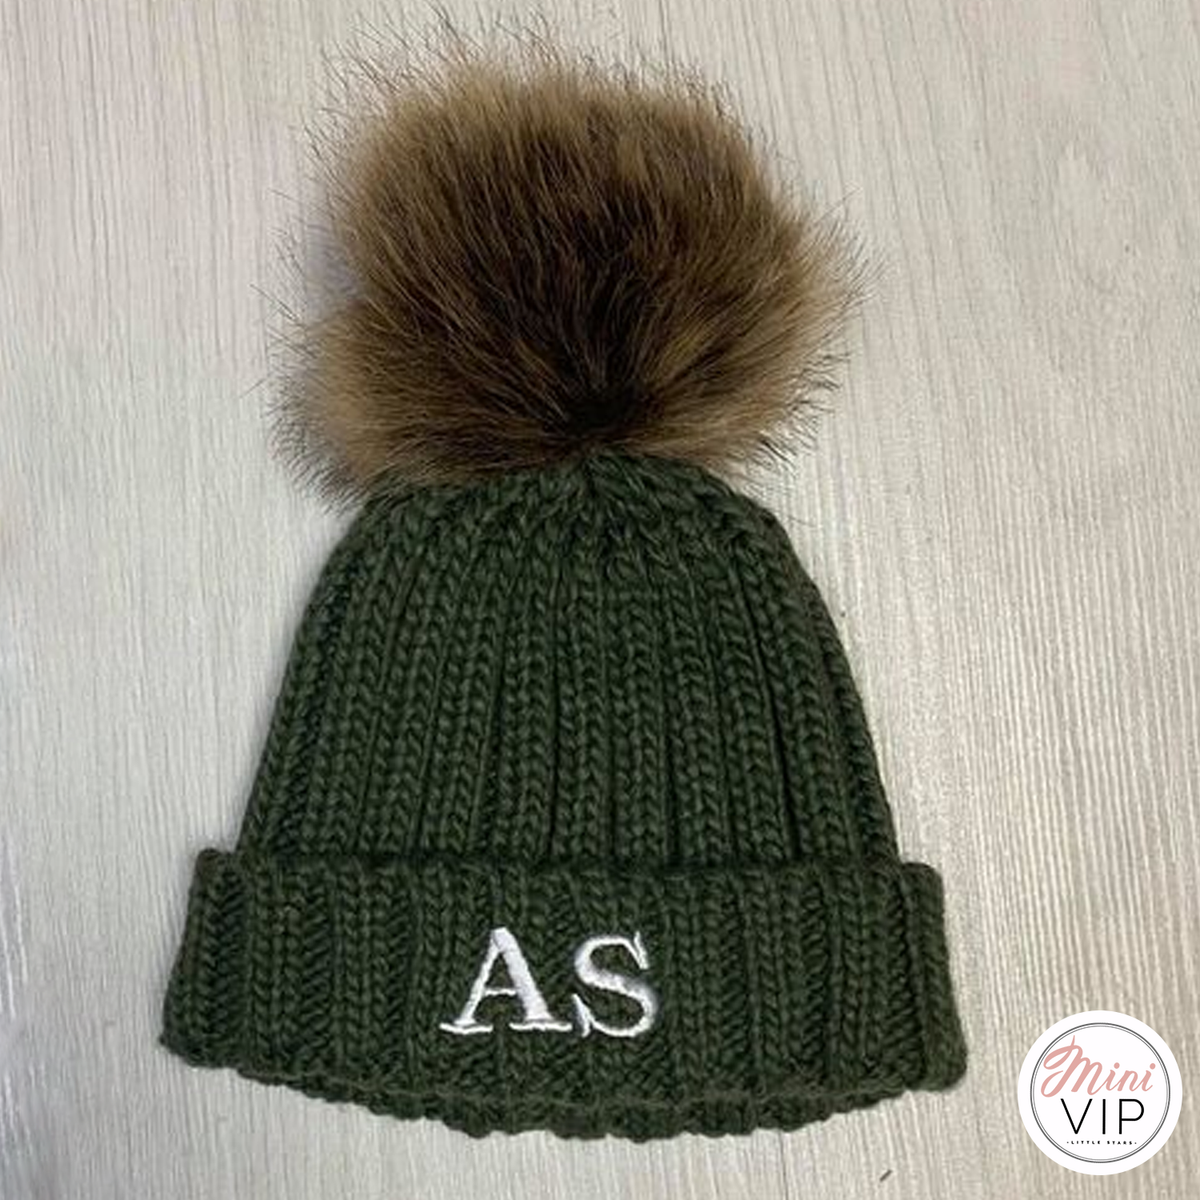 Khaki Embroidered Cable Knit Beanie Hat - Infants, Junior &amp; Adult sizes